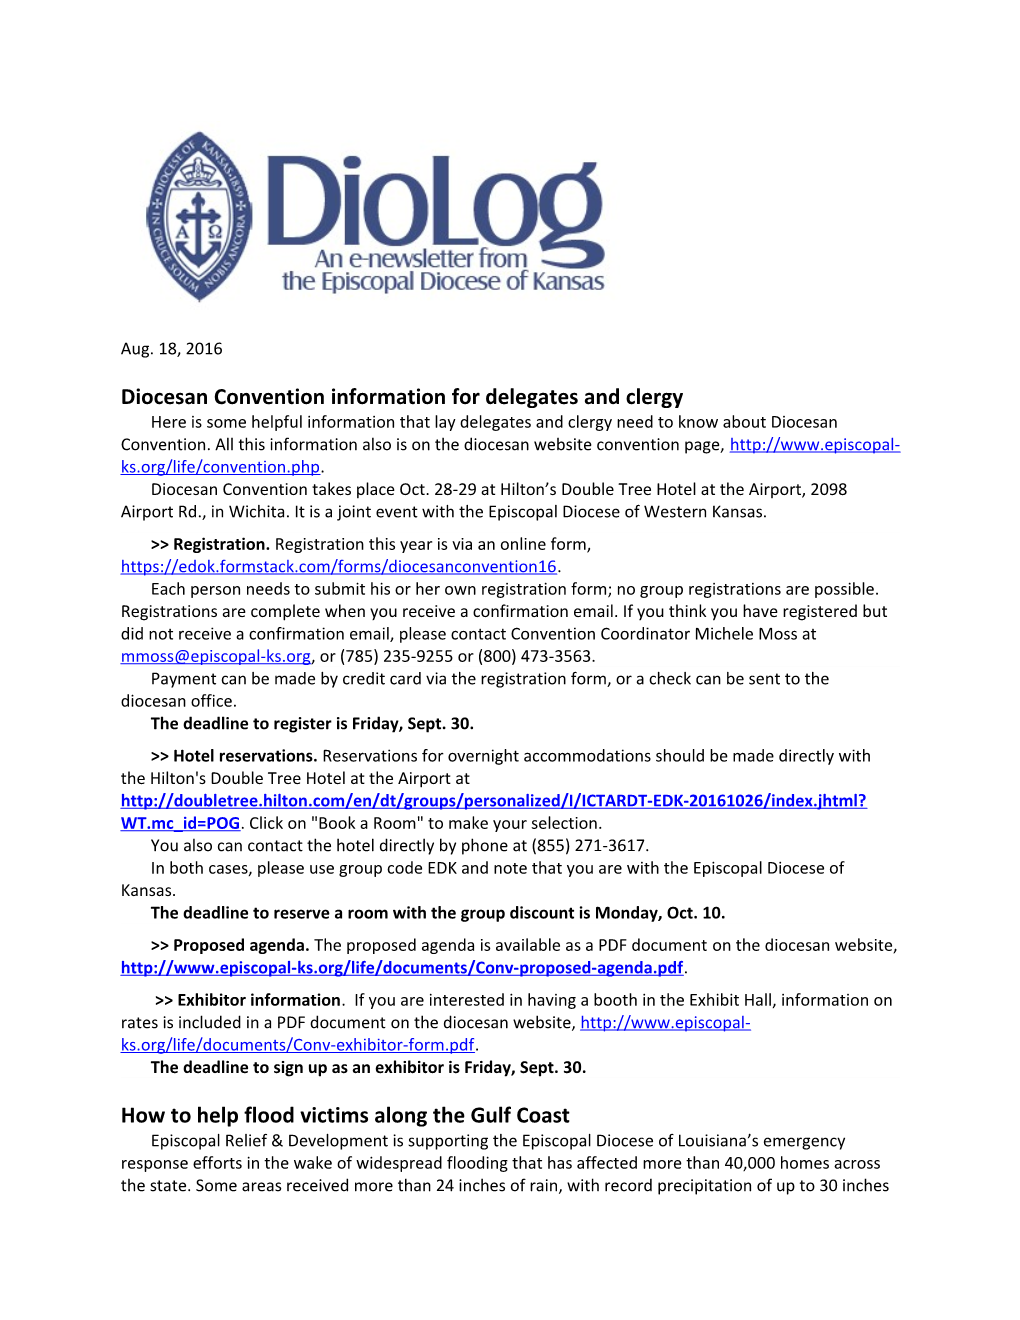 Diocesan Convention Information for Delegates and Clergy